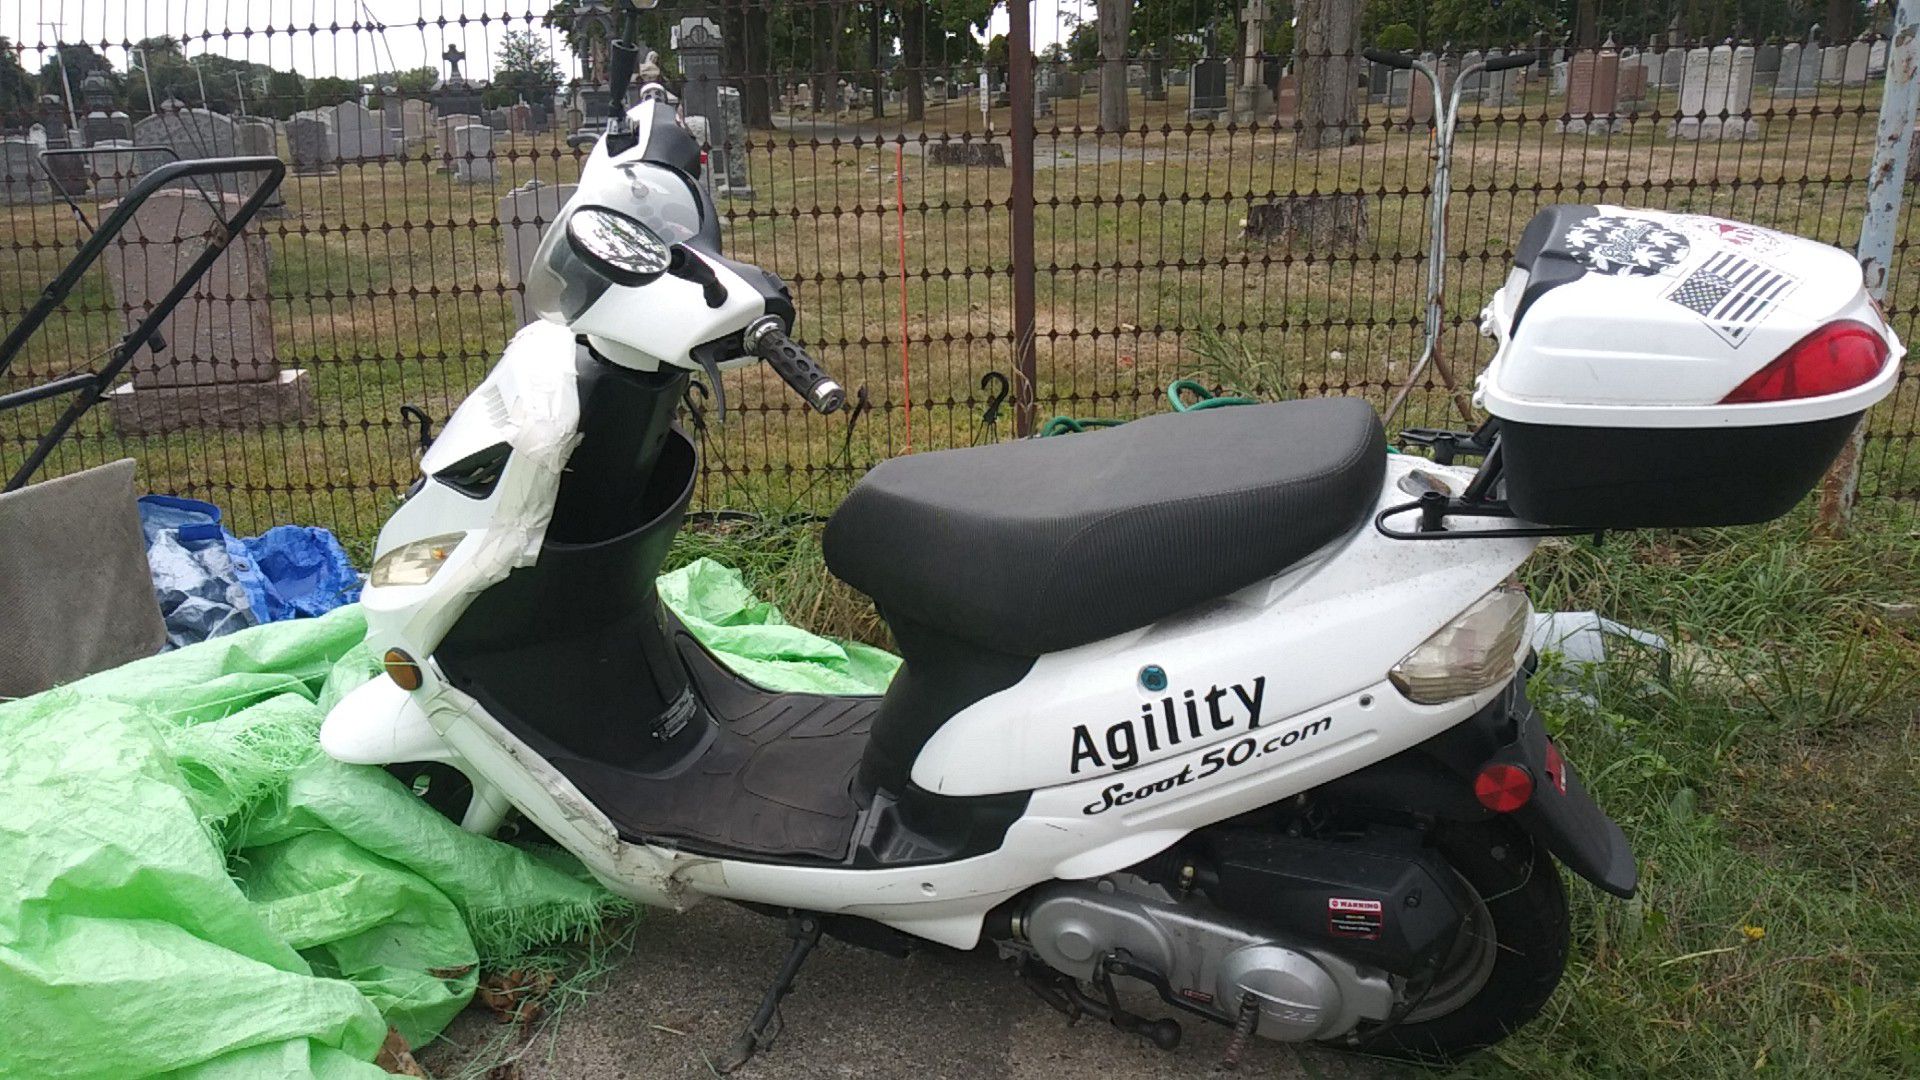 2018 Agility scoot 50 needs work price reflects